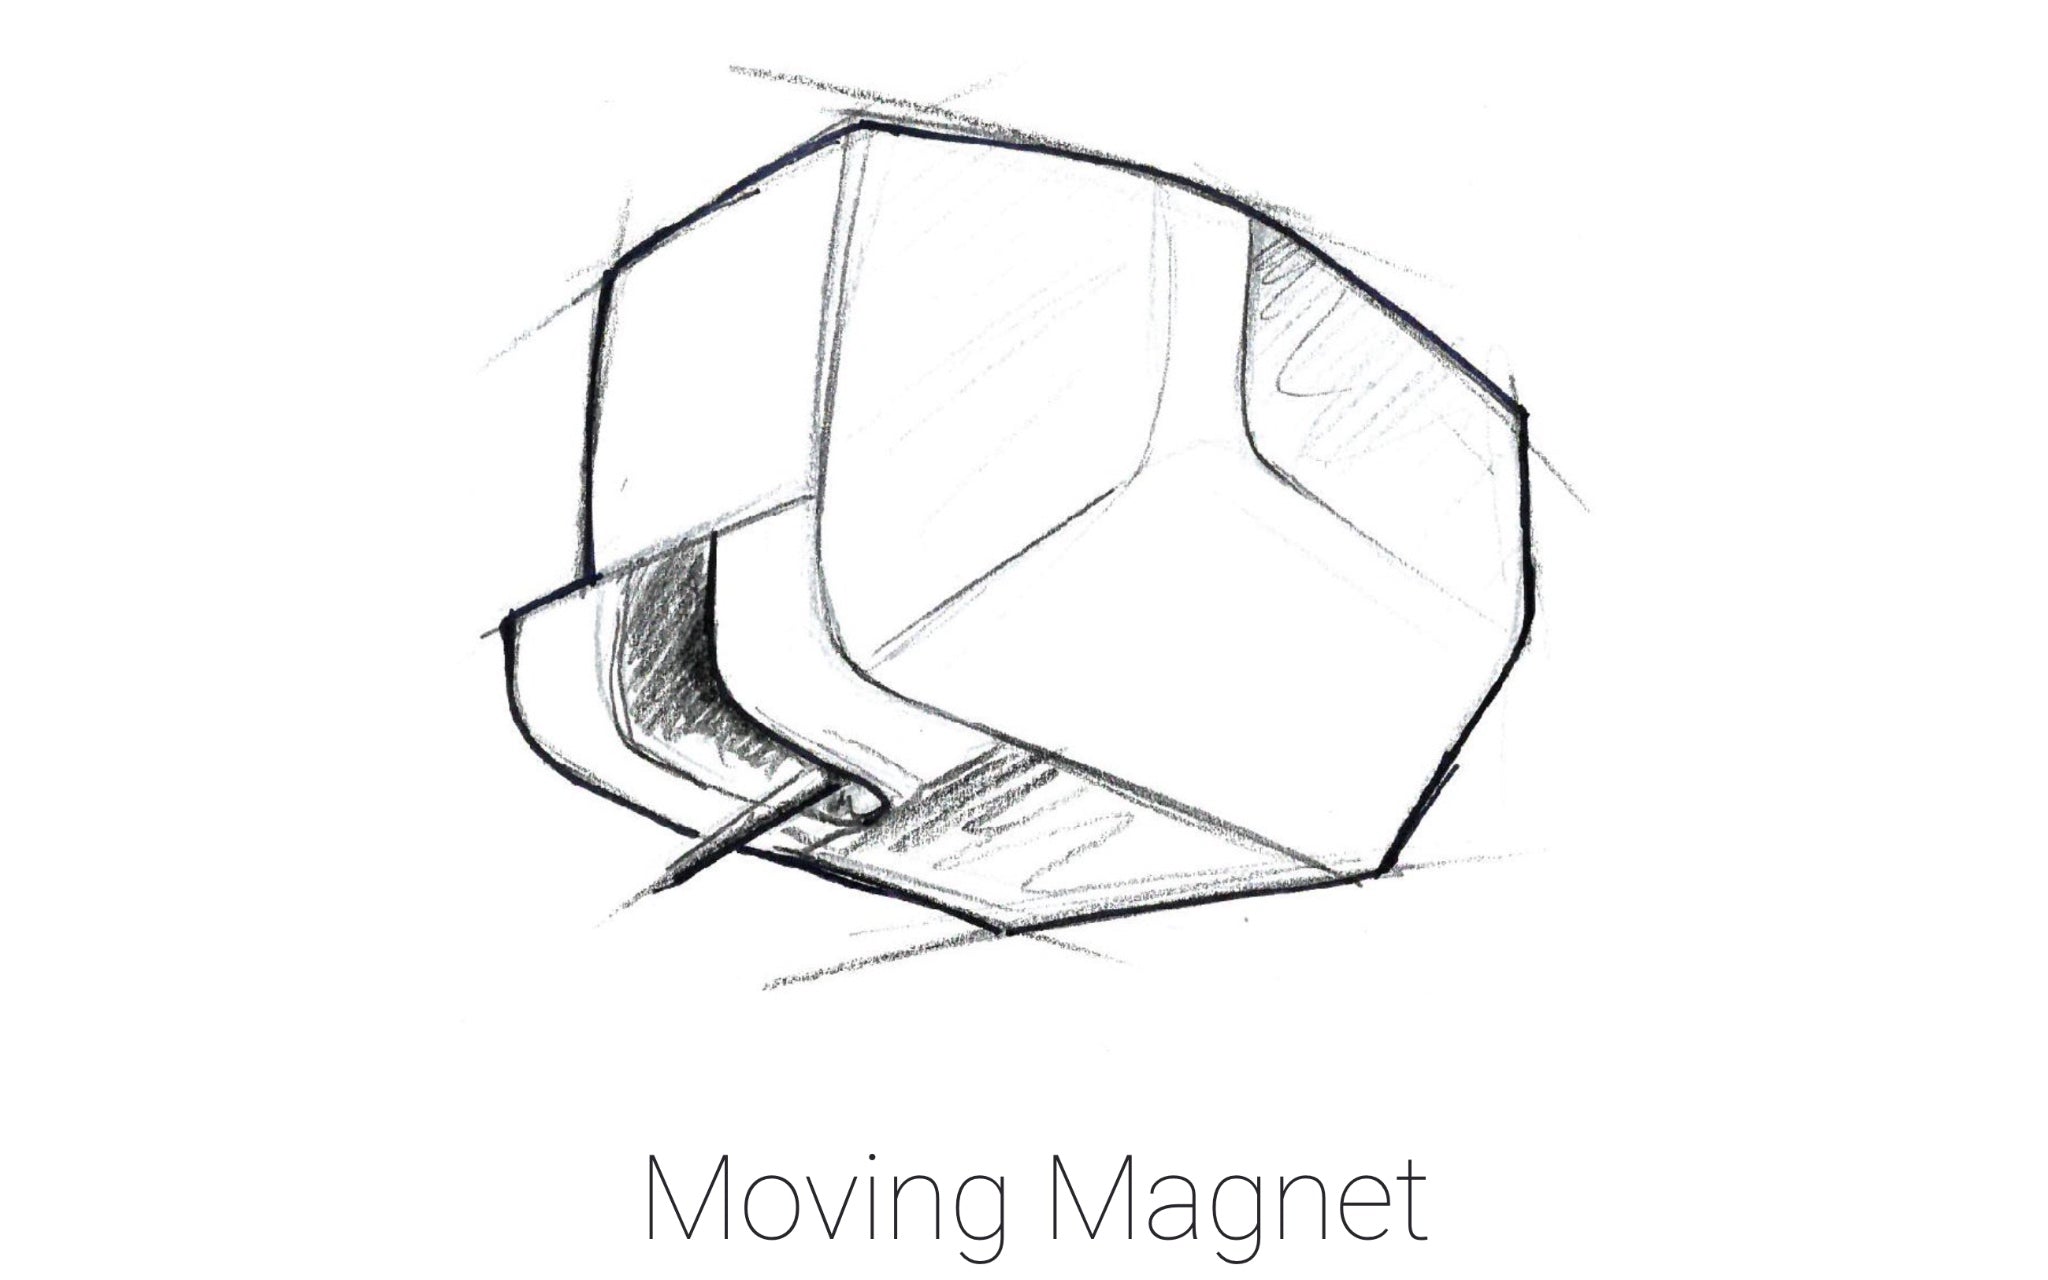 Sumiko moving magnet cartridge charcoal sketch over white background